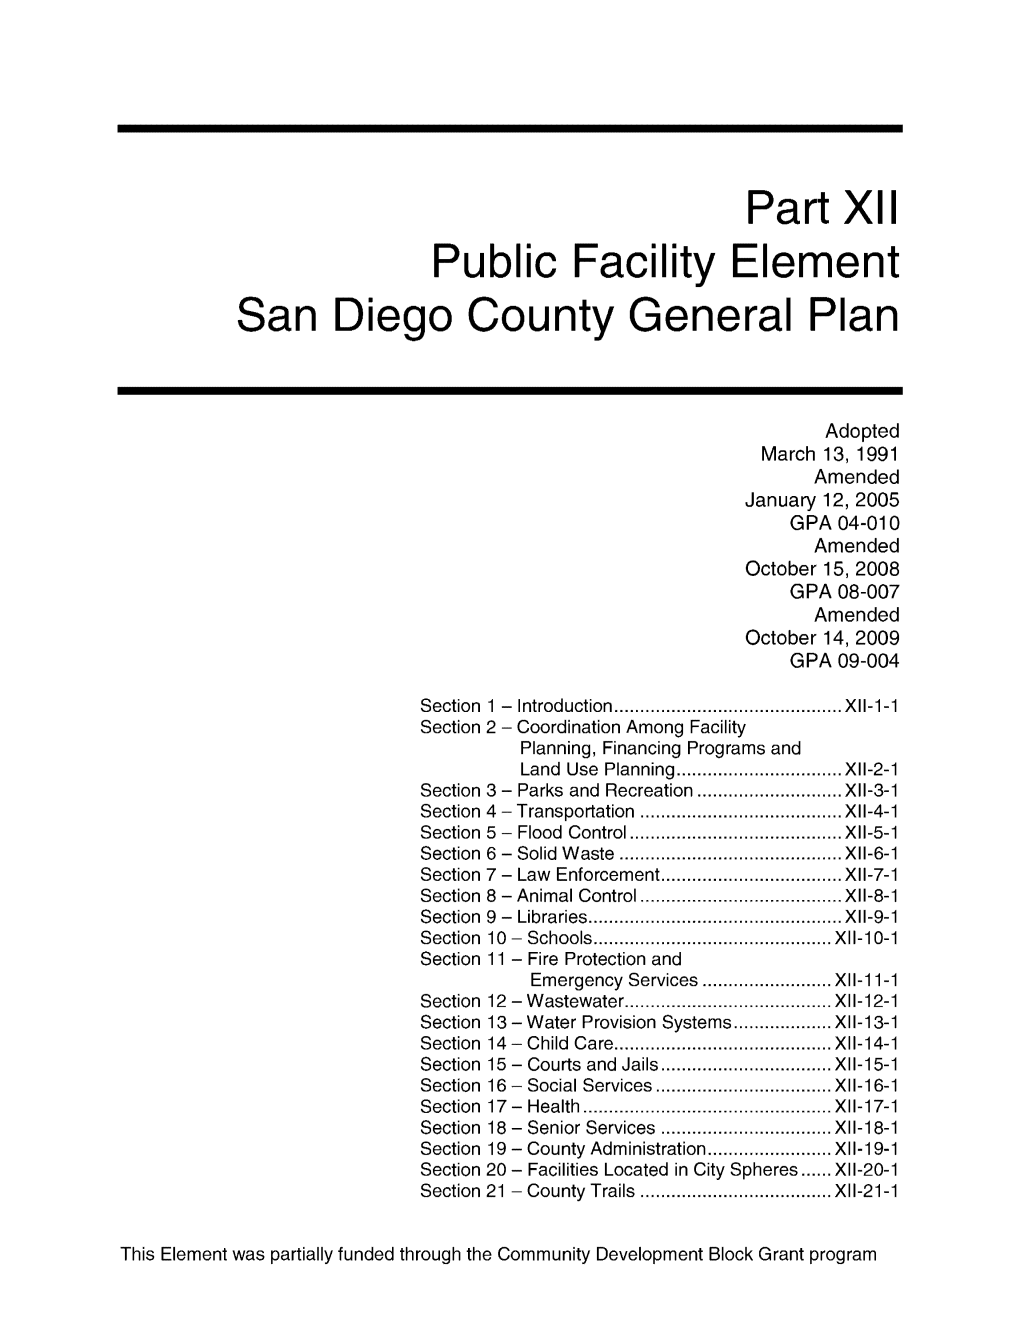 Part XII Public Facility Element San Diego County General Plan